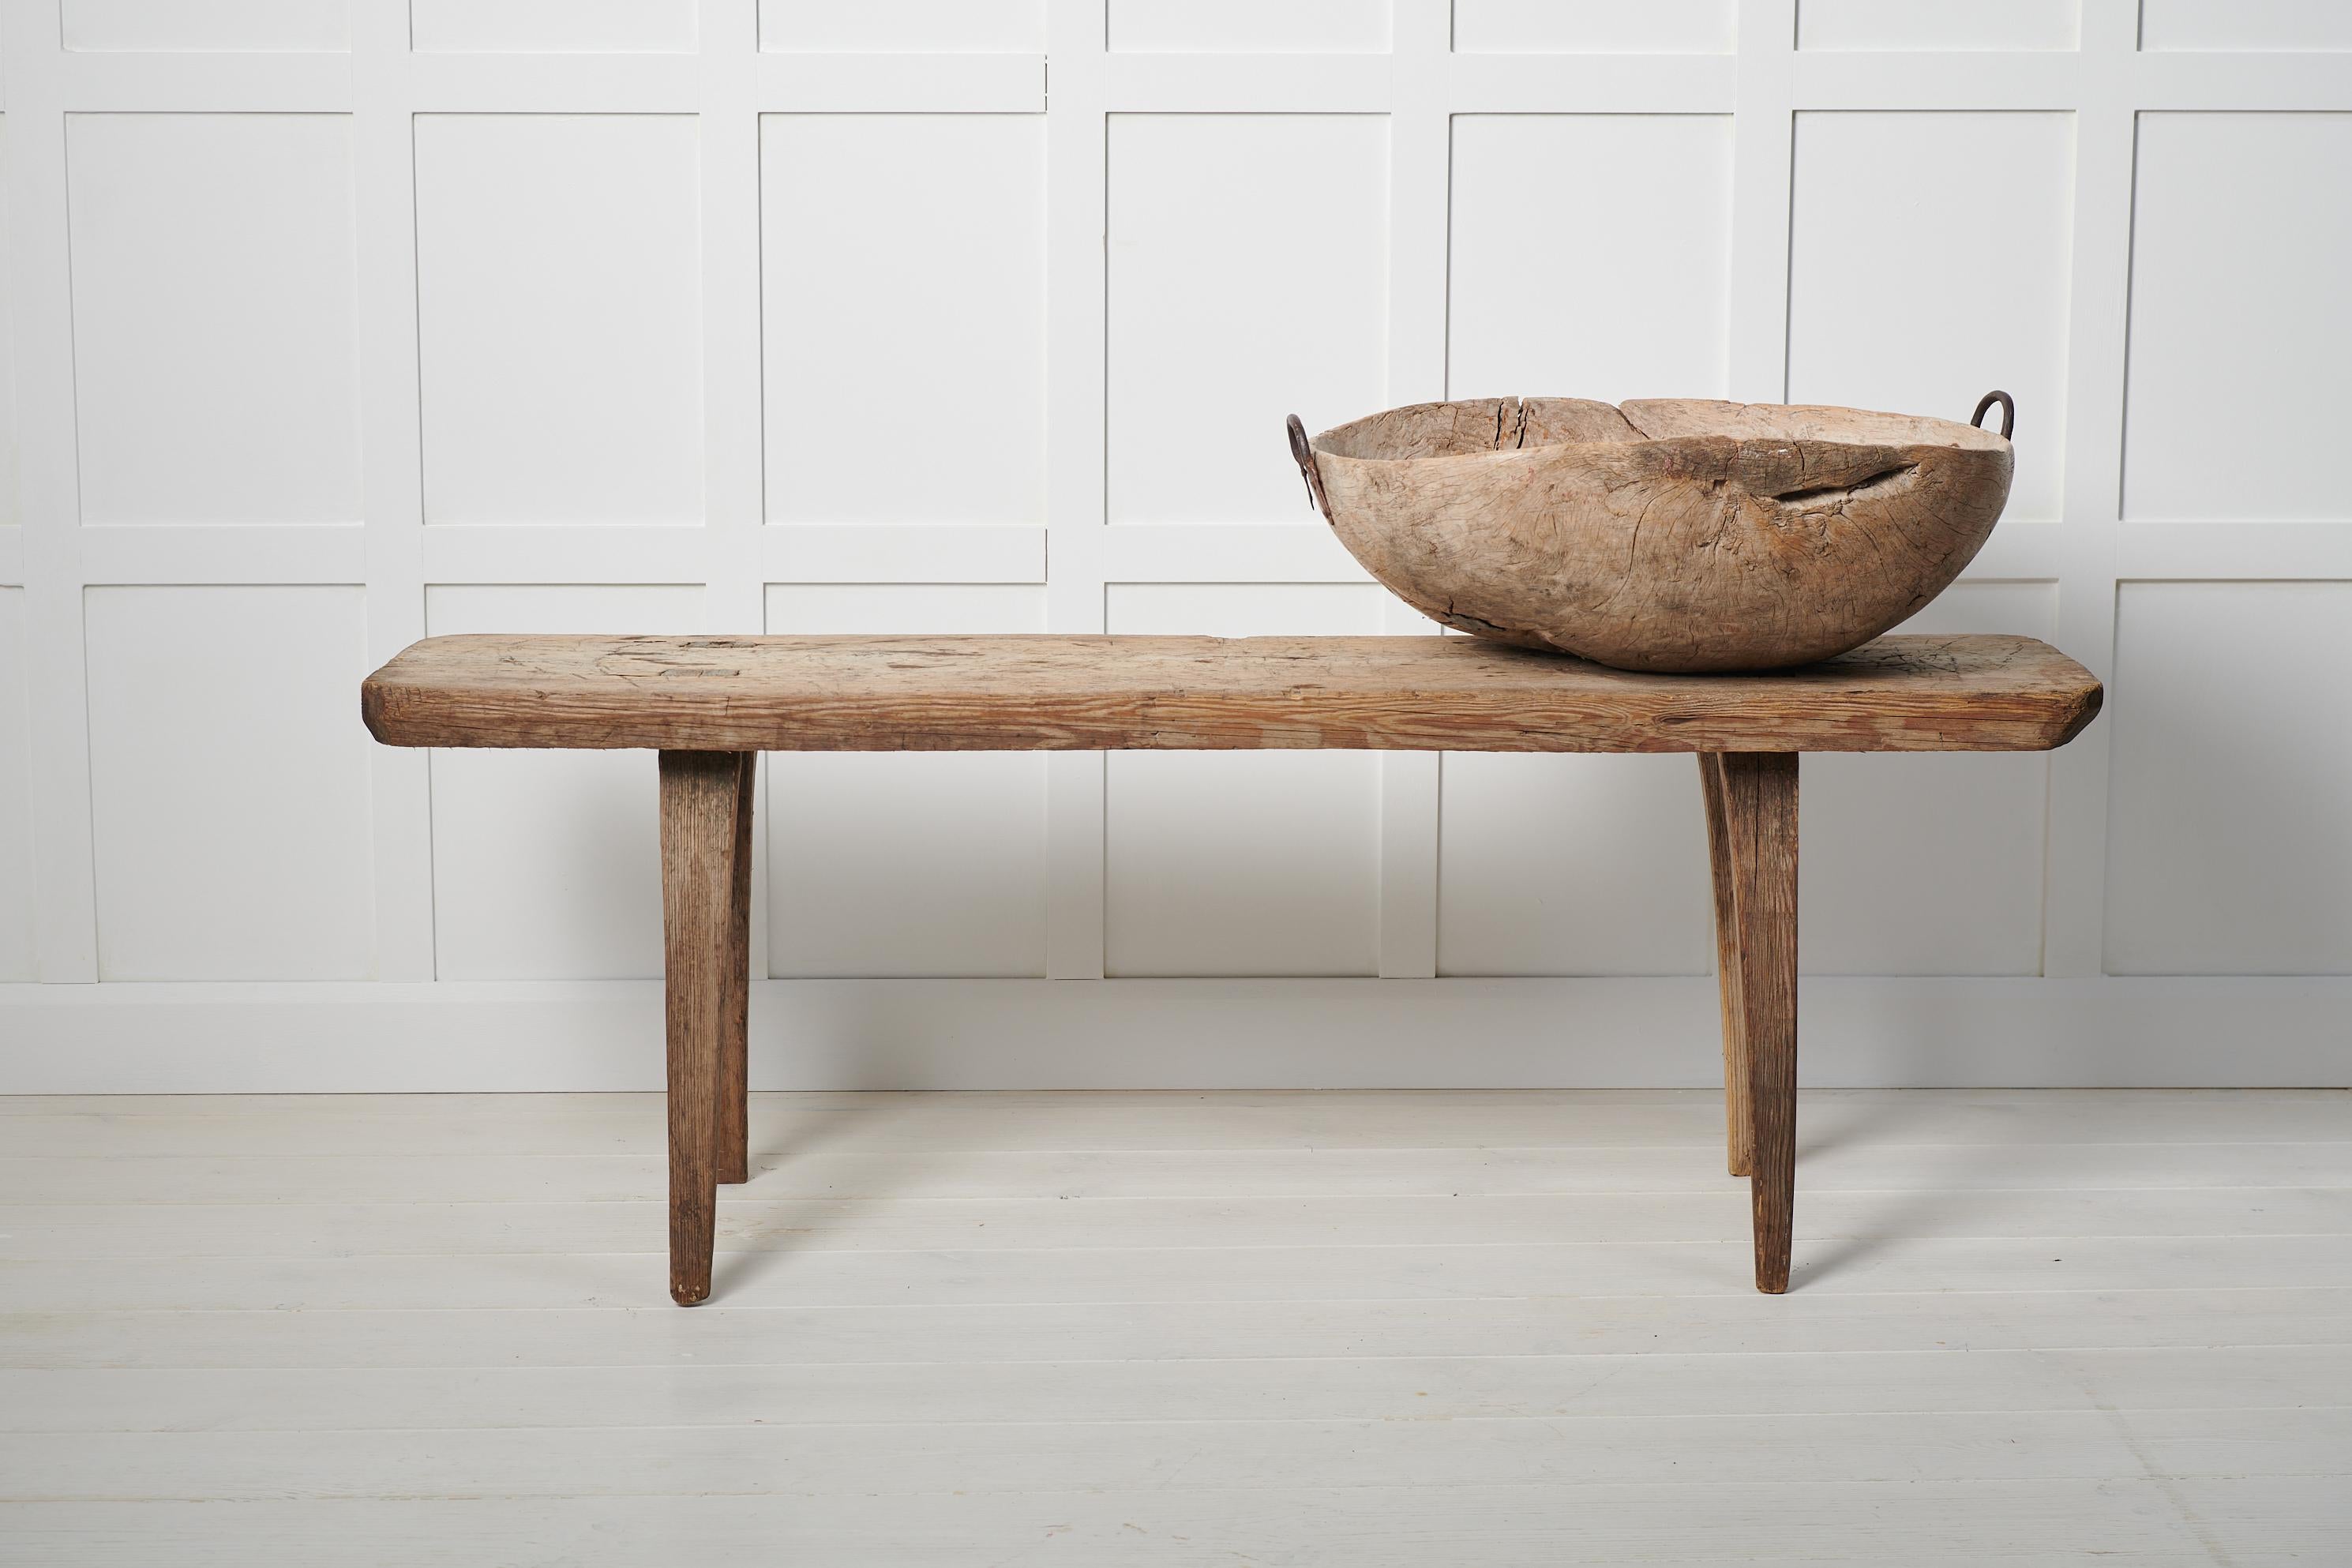 Rare genuine root bowl from northern Sweden made during the first few years of the 19th century, around 1810 to 1820. The bowl is in untouched condition with an attractive patina. The wood has a soft surface after 250 years of use. It is unusually